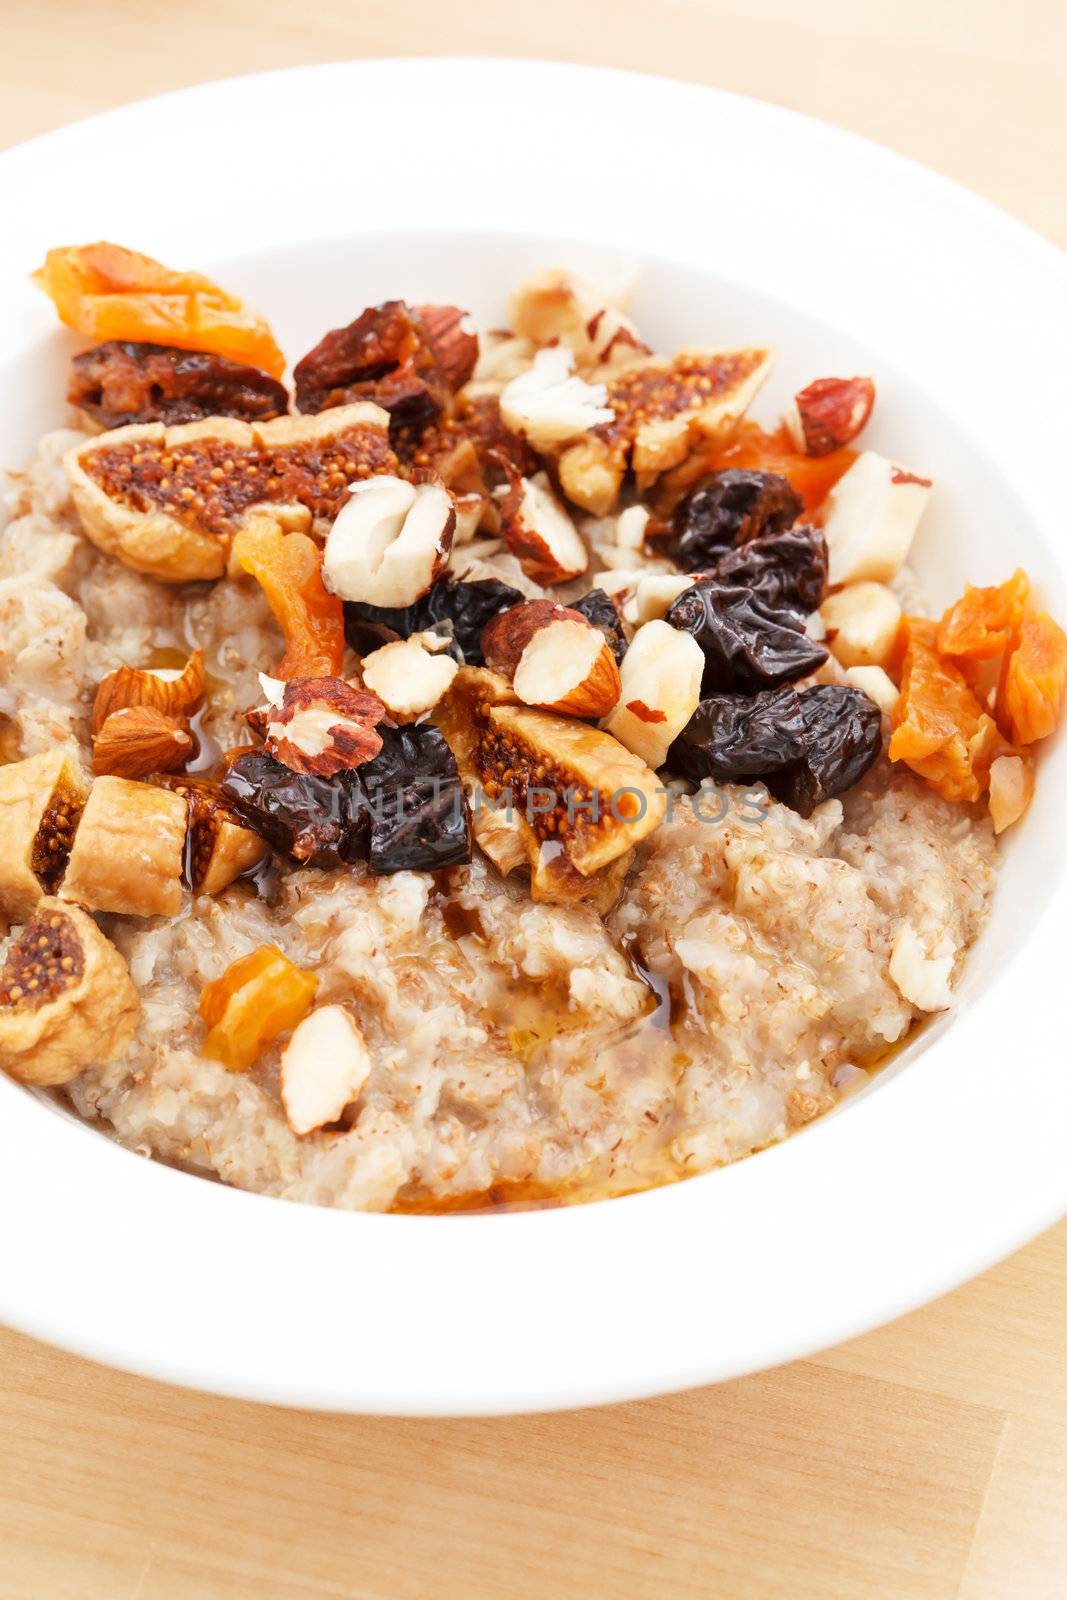 oatmeal with raisins, nuts and maple syrup